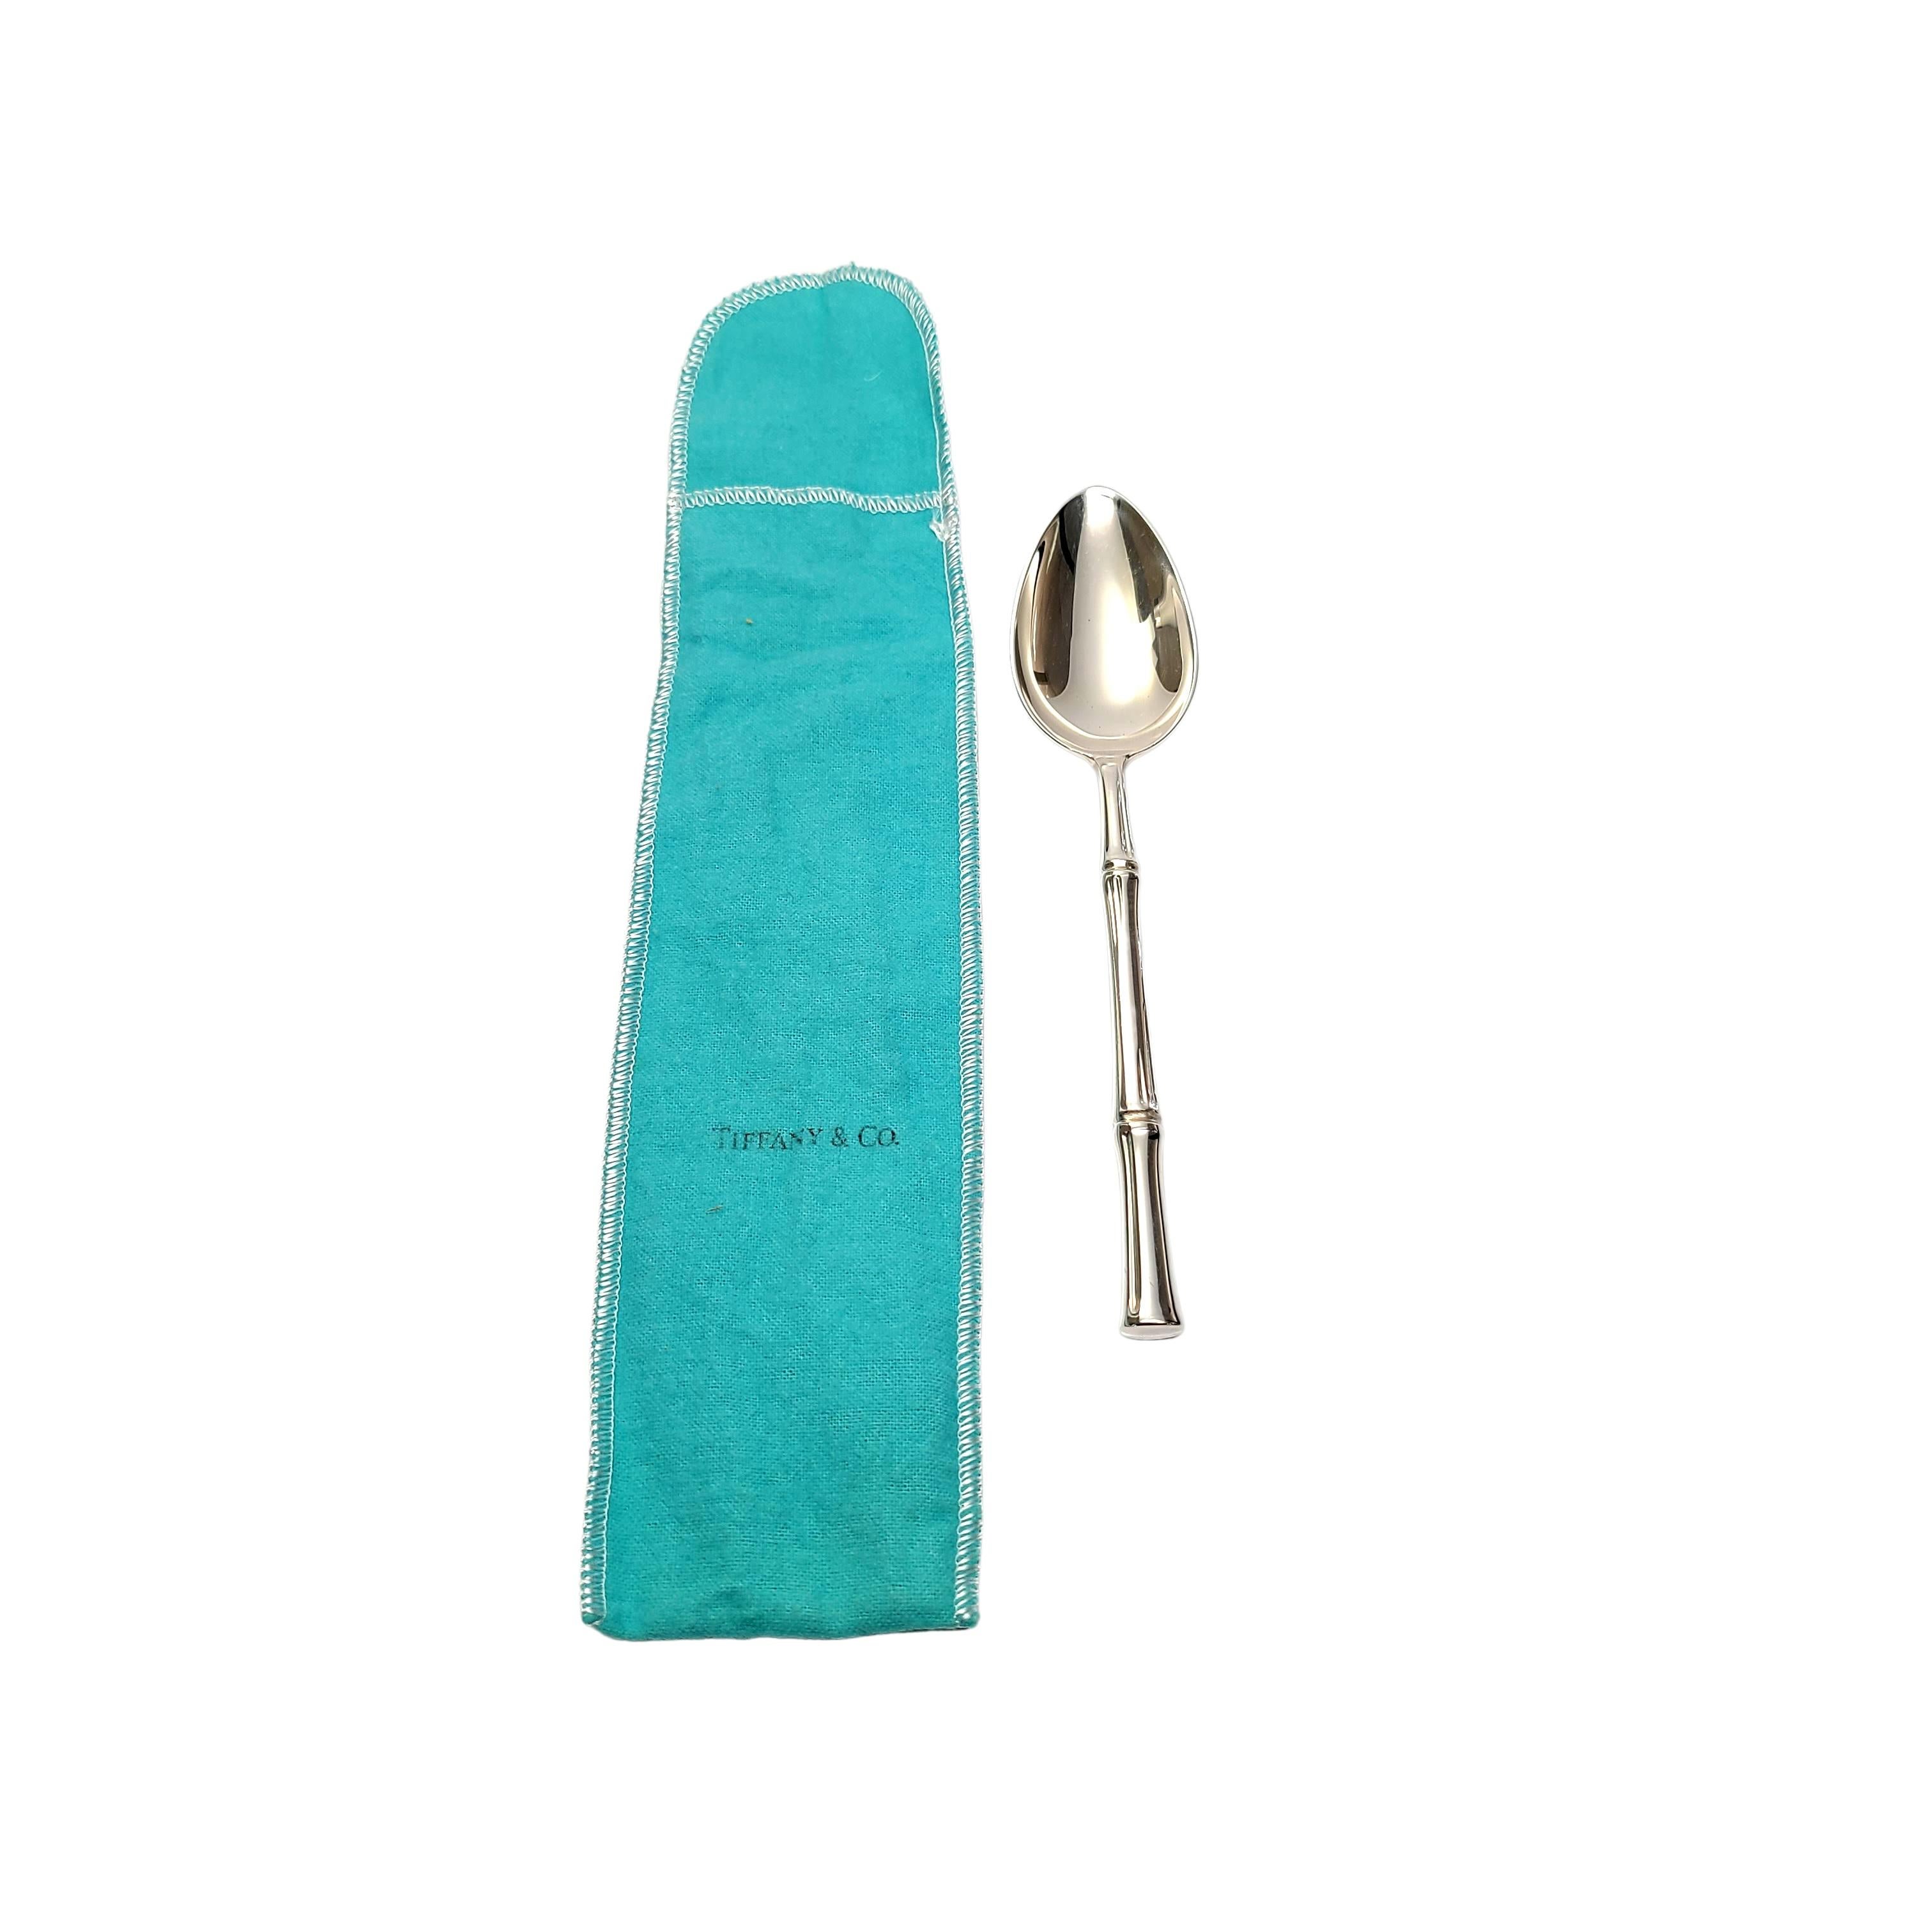 Tiffany & Co. Sterling Silver Bamboo Dessert/ Oval Soup Spoon with Pouch 'A'